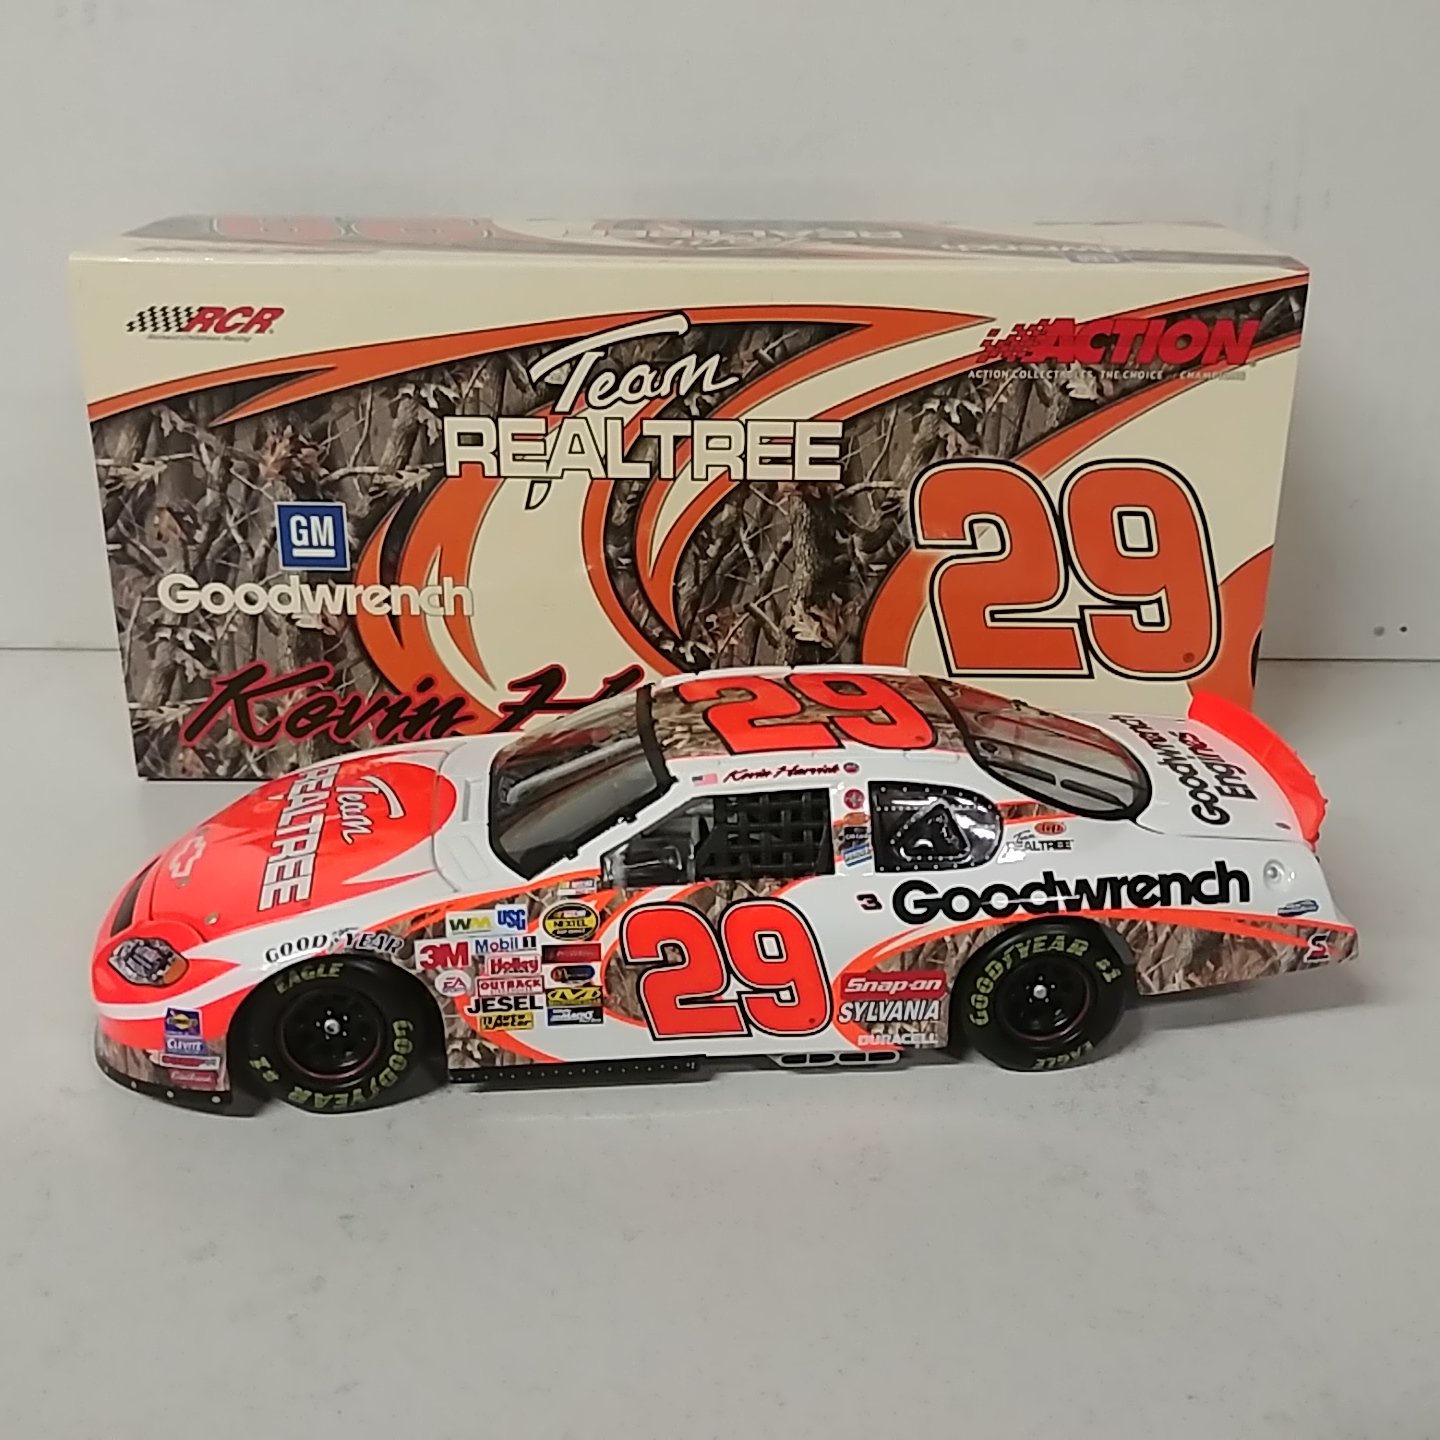 2004 Kevin Harvick 1/24th GM Goodwrench "Real Tree" c/w car